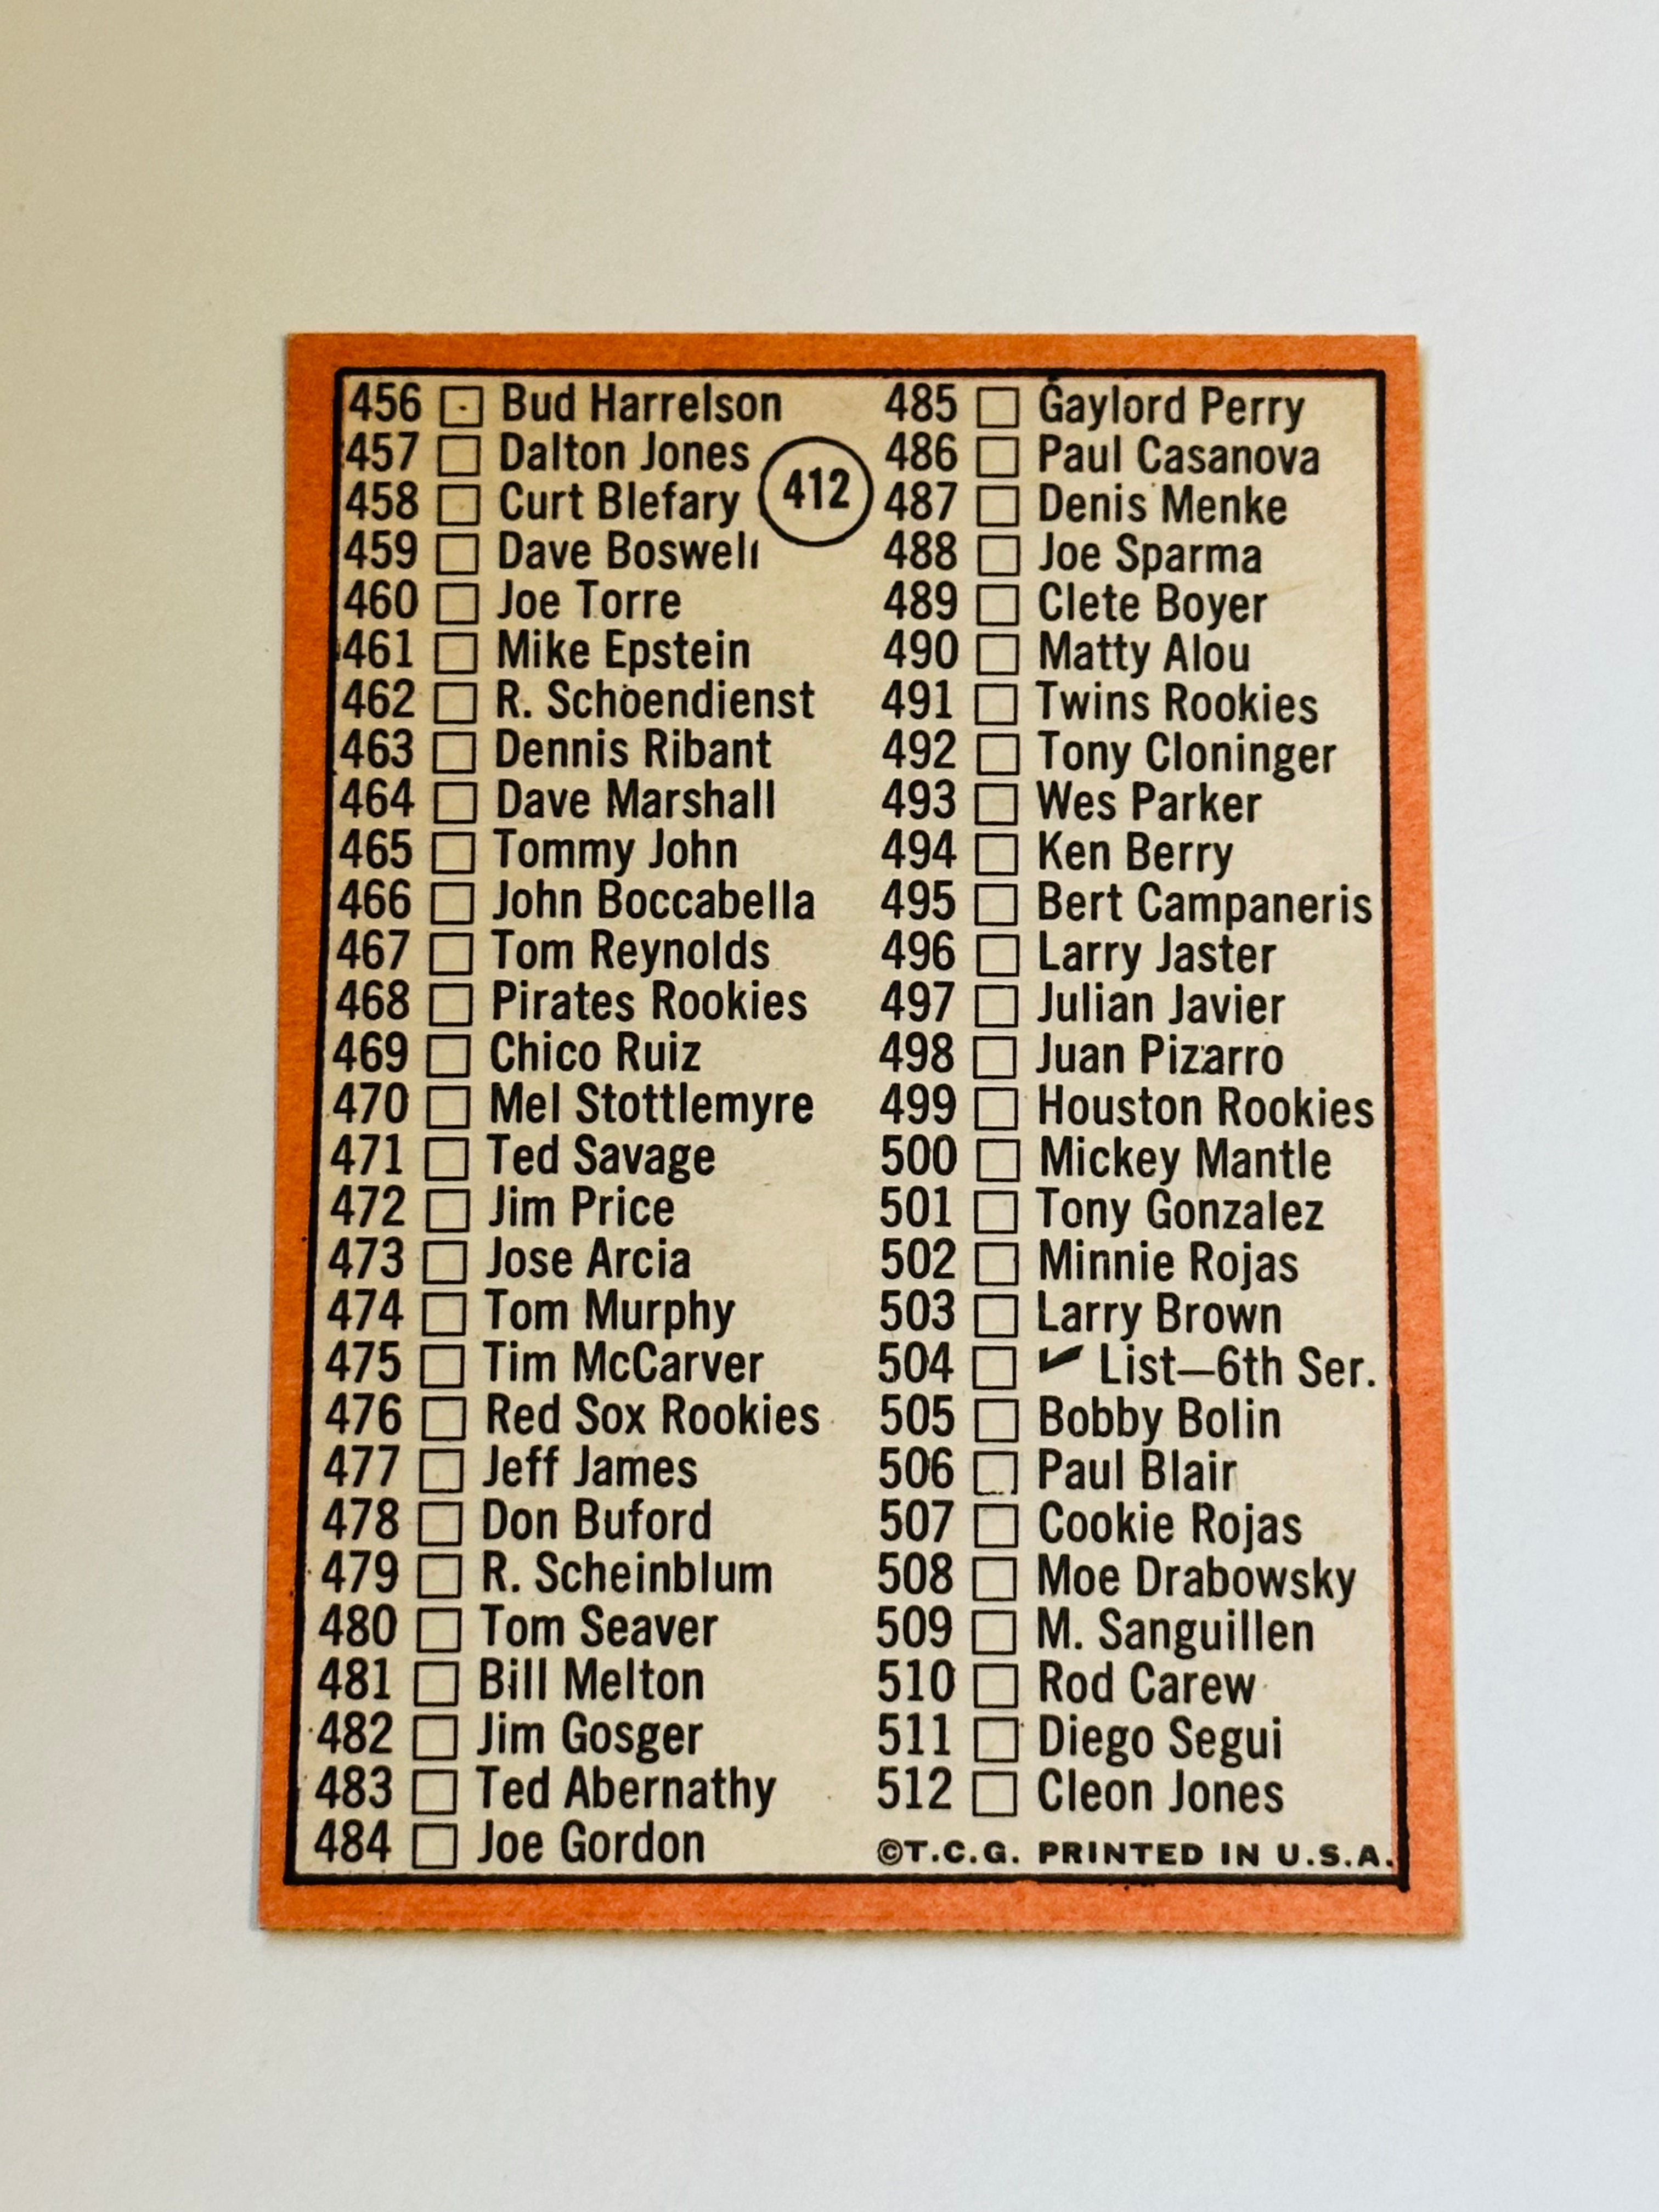 1969 Topps Mickey Mantle baseball unmarked checklist card